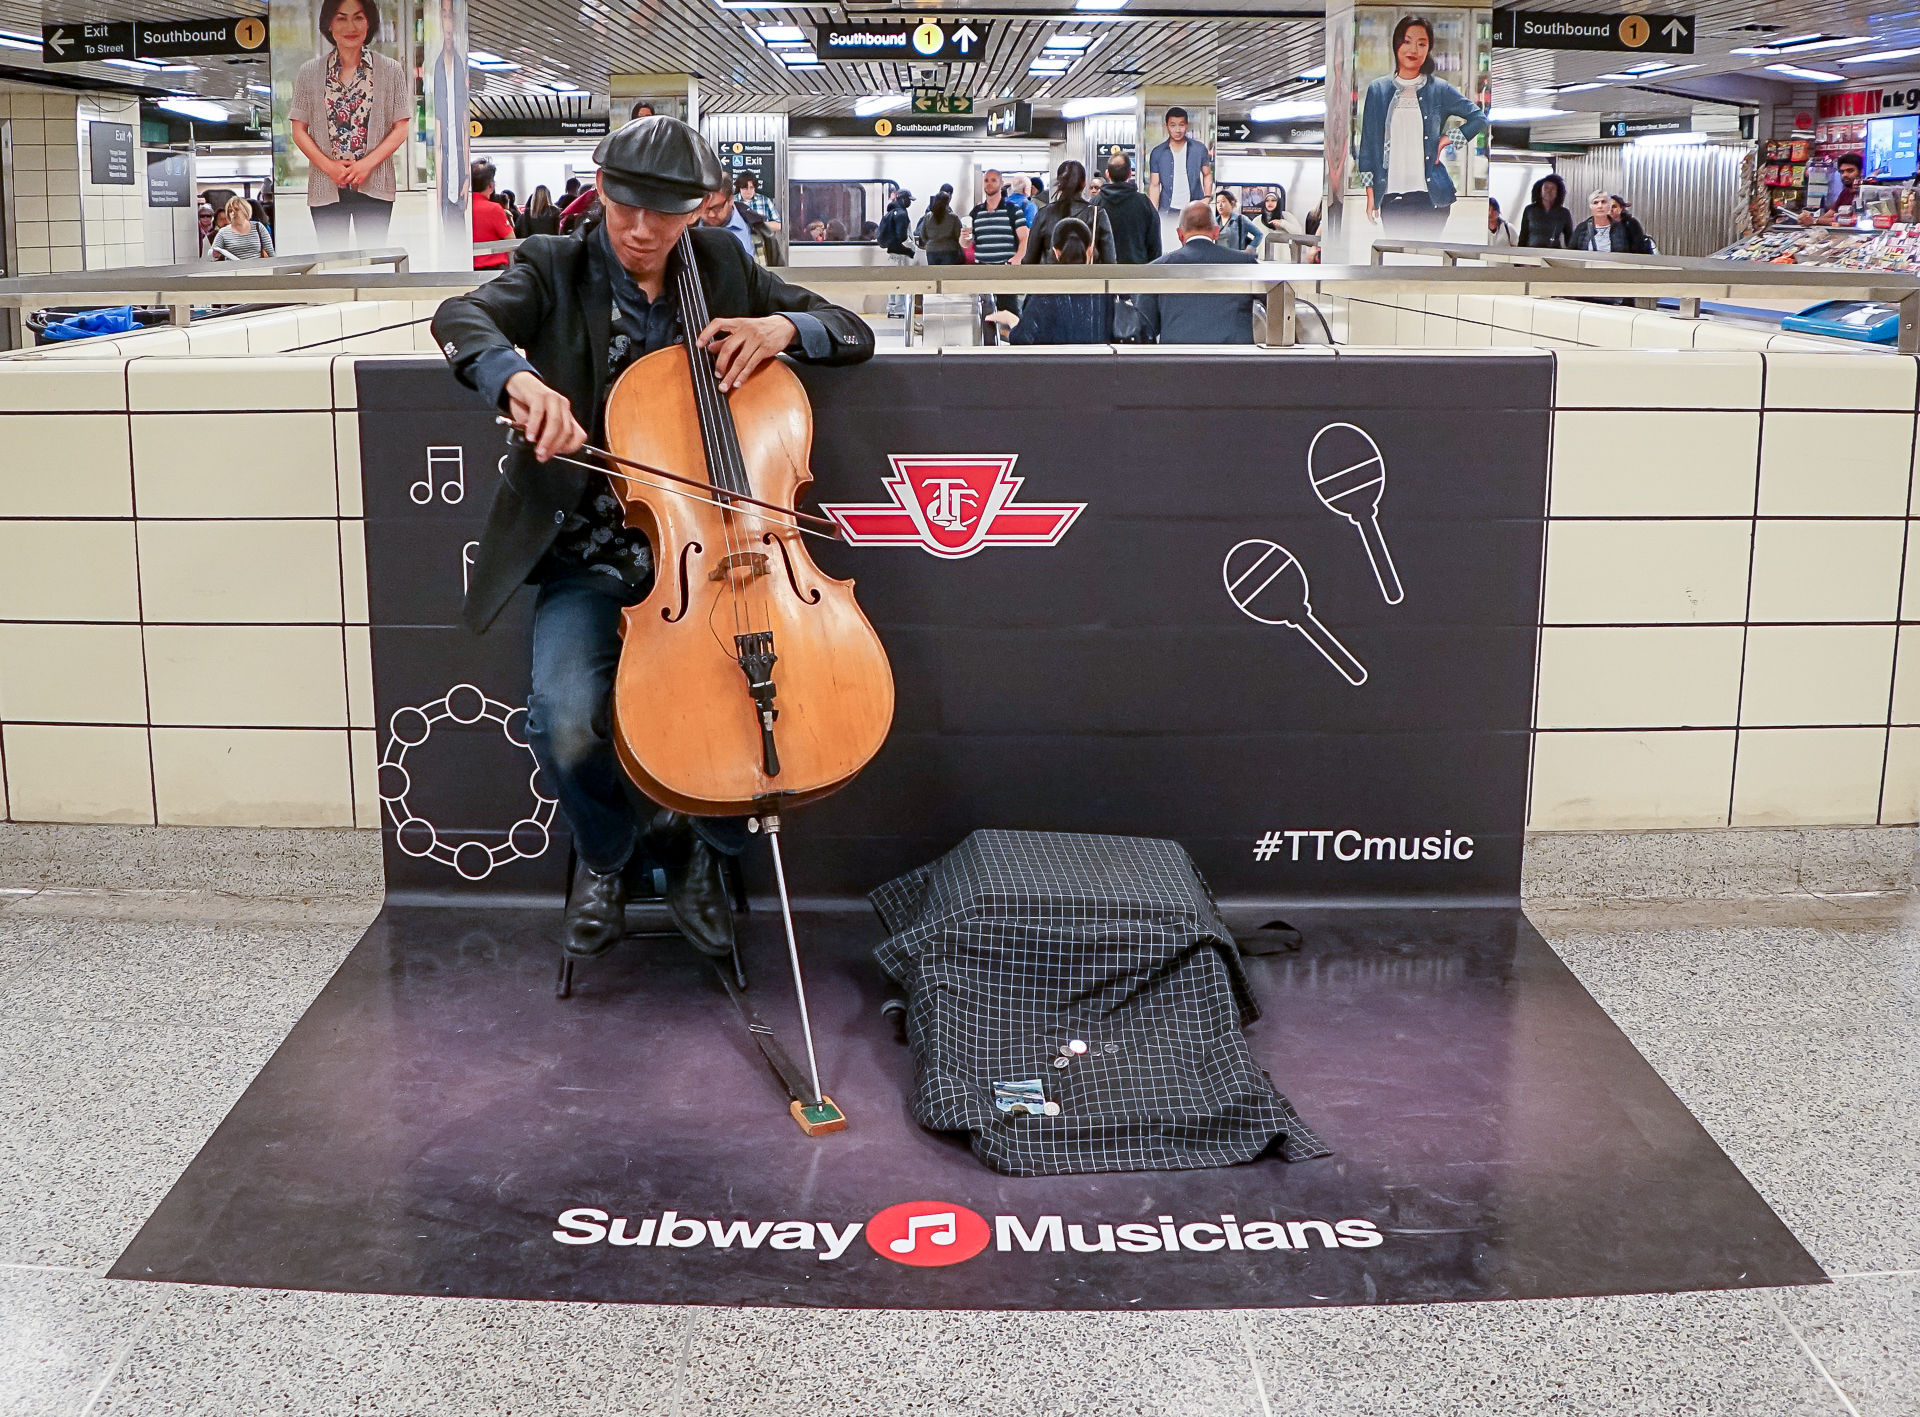 Subway musician performing in stage area